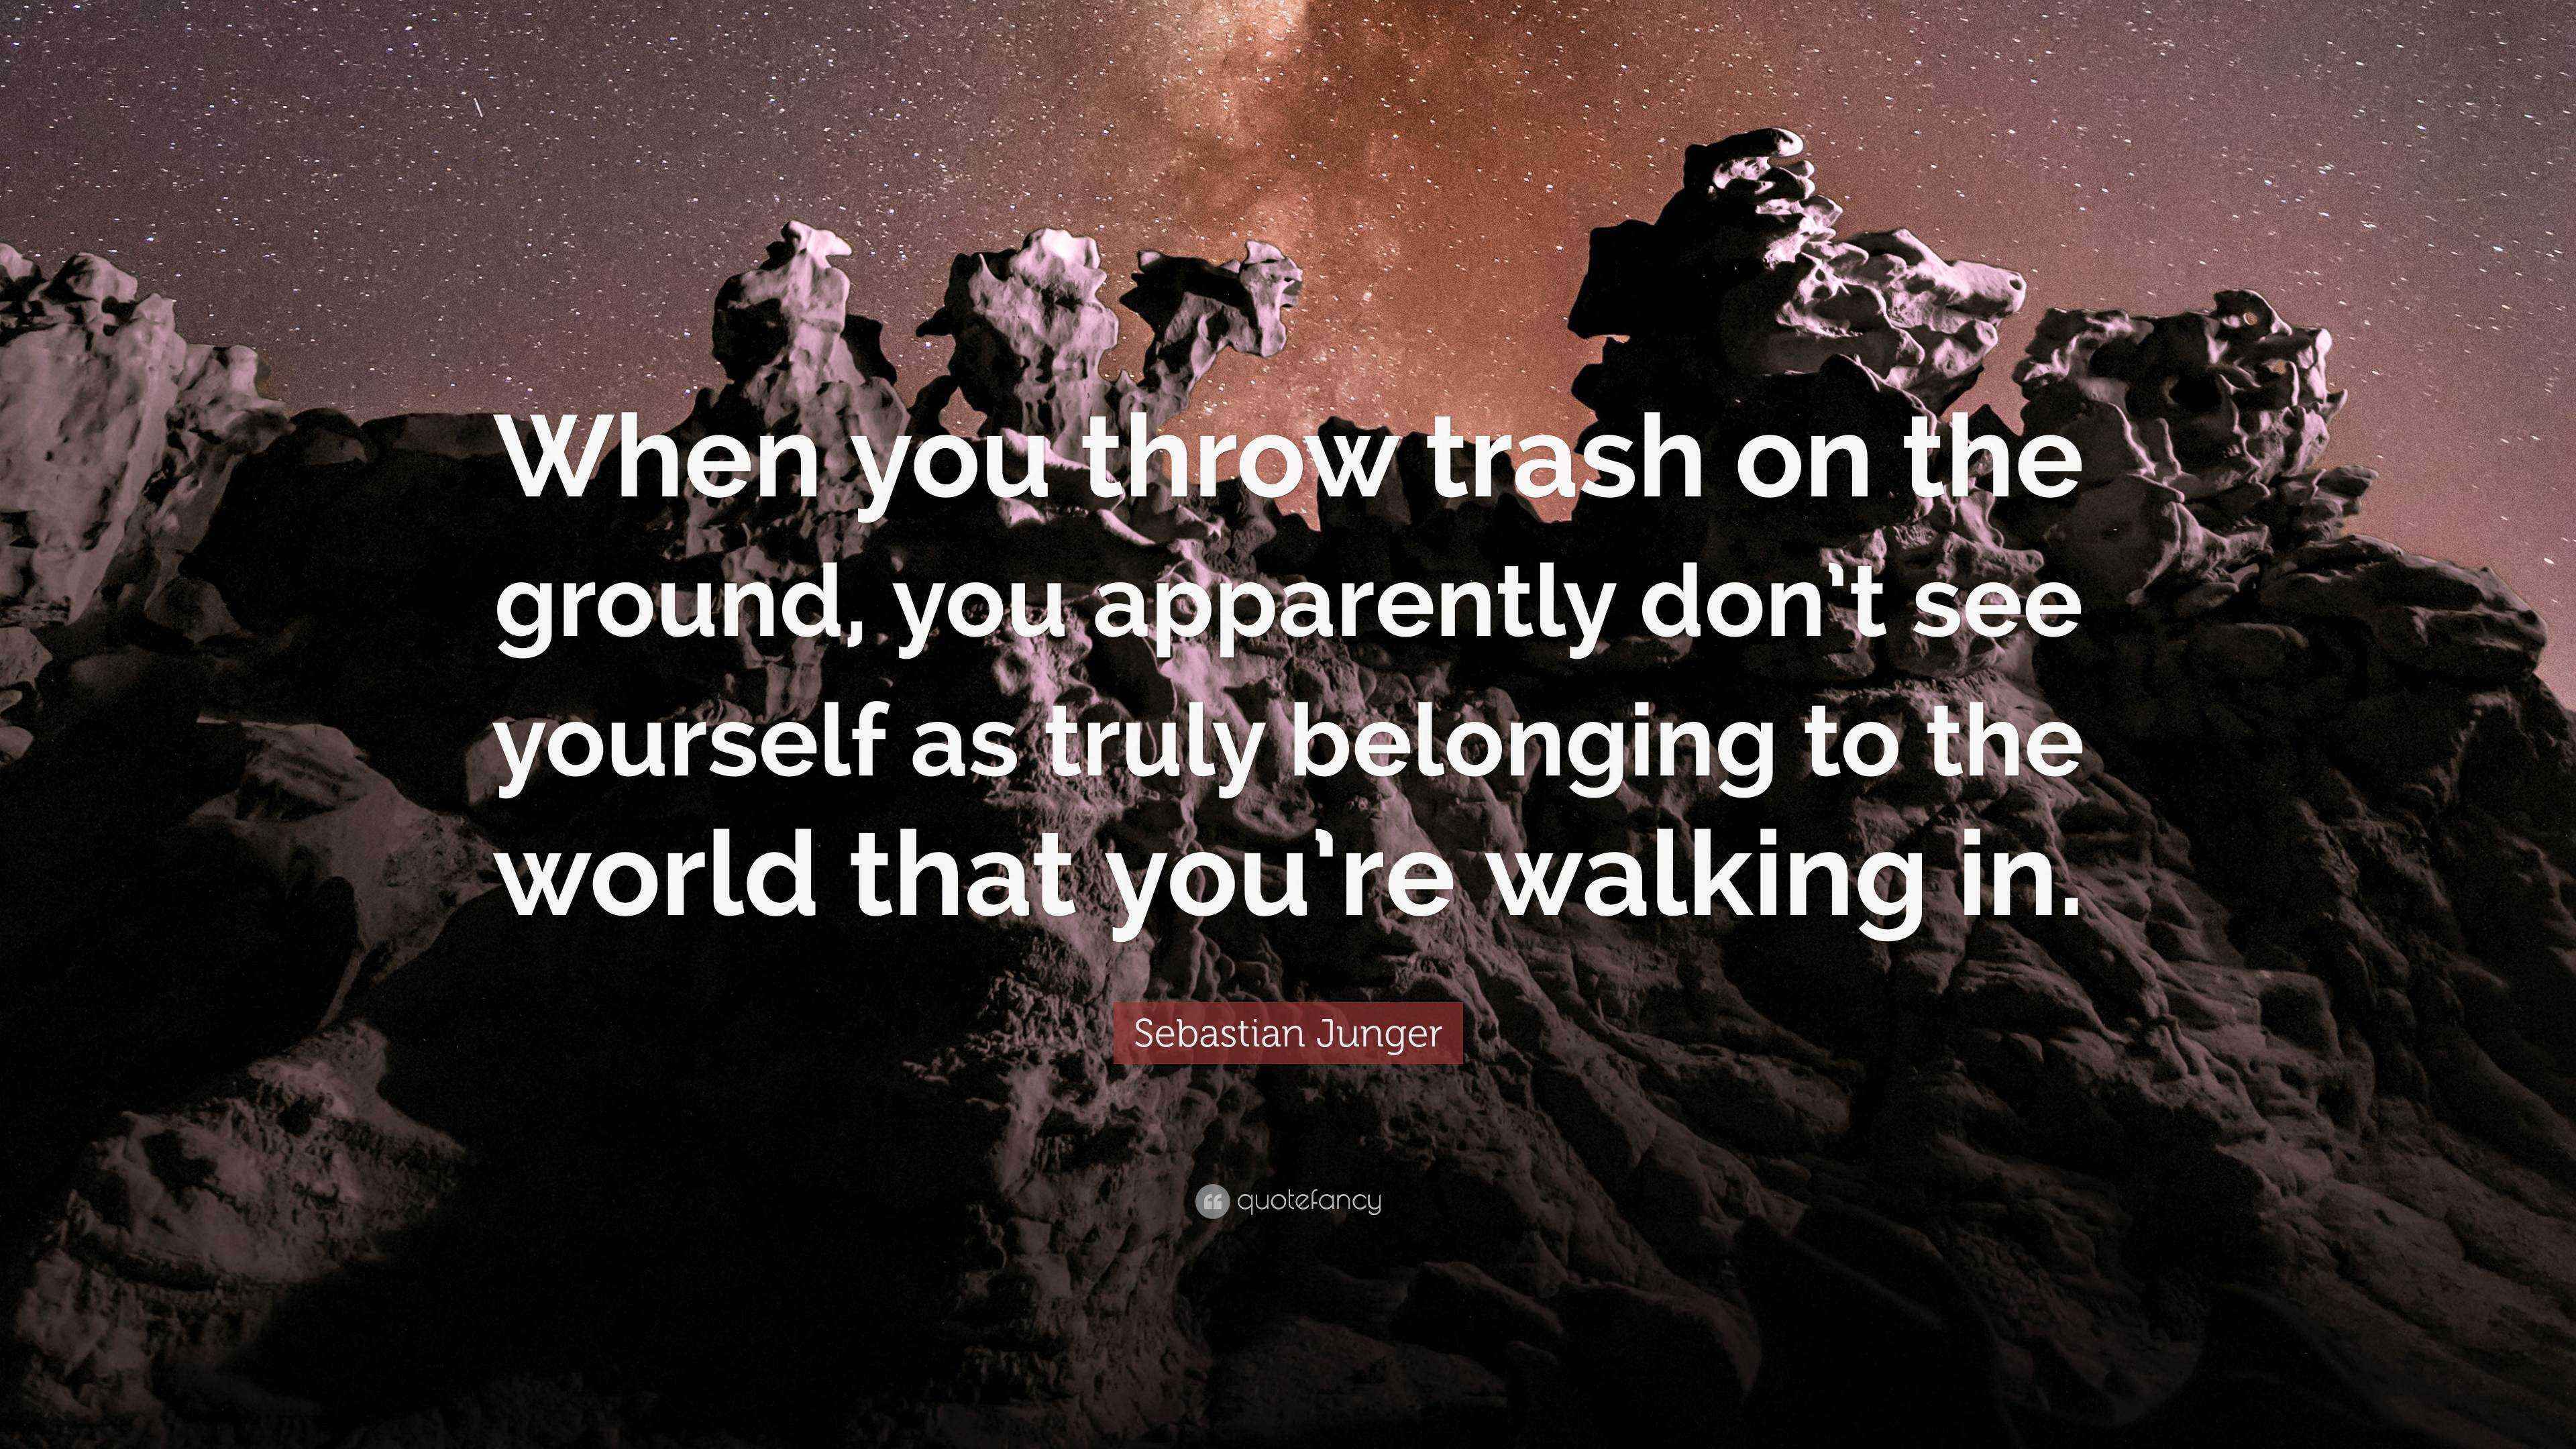 Sebastian Junger Quote: “When you throw trash on the ground, you